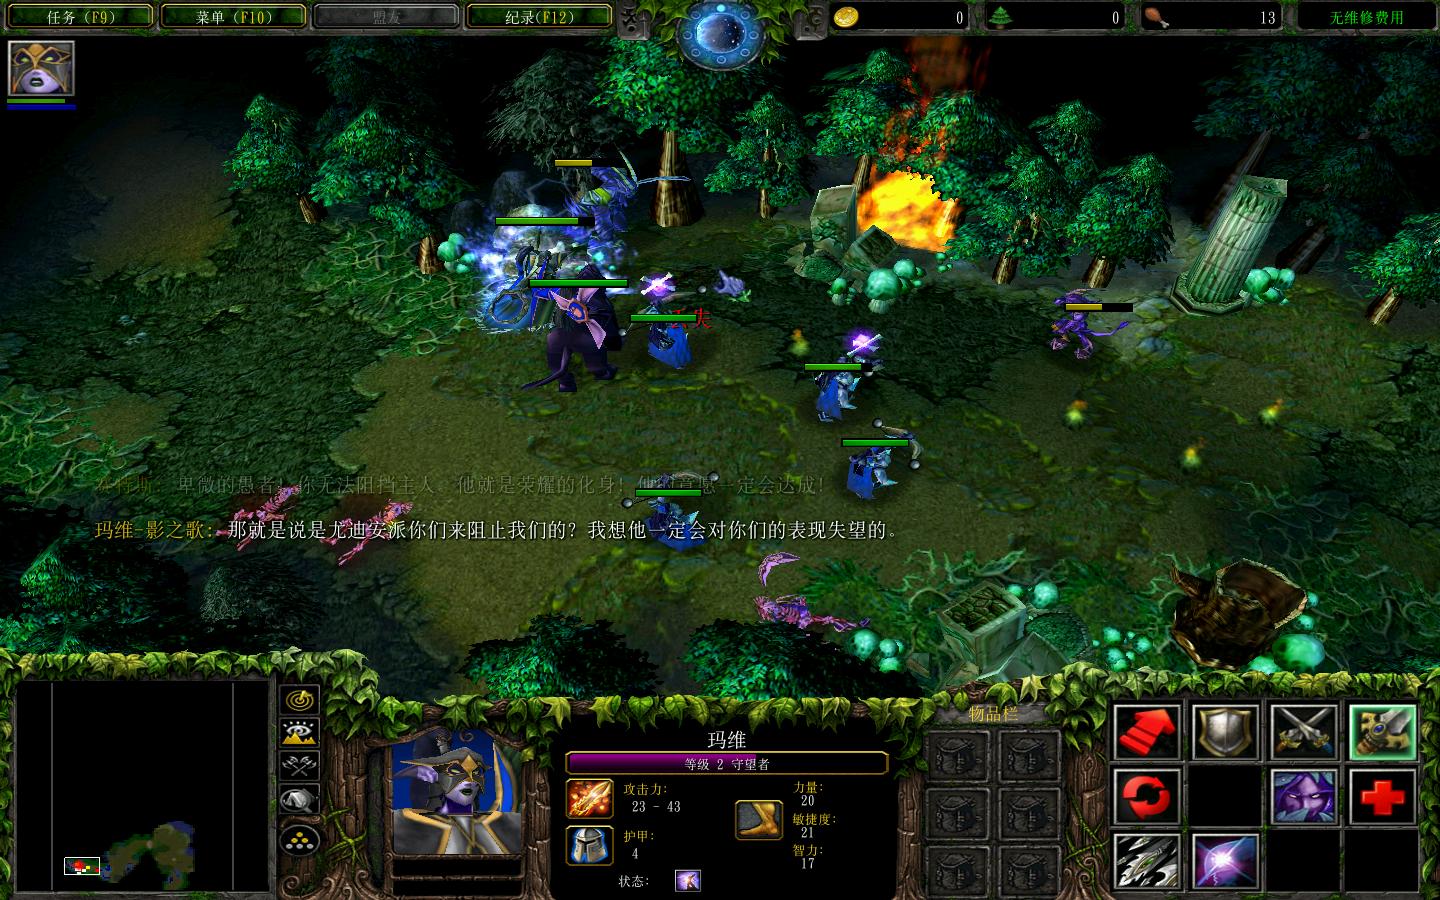 ħ3Warcraft III The Frozen Throne1.24-1.28IV֮ v5.7ʽ